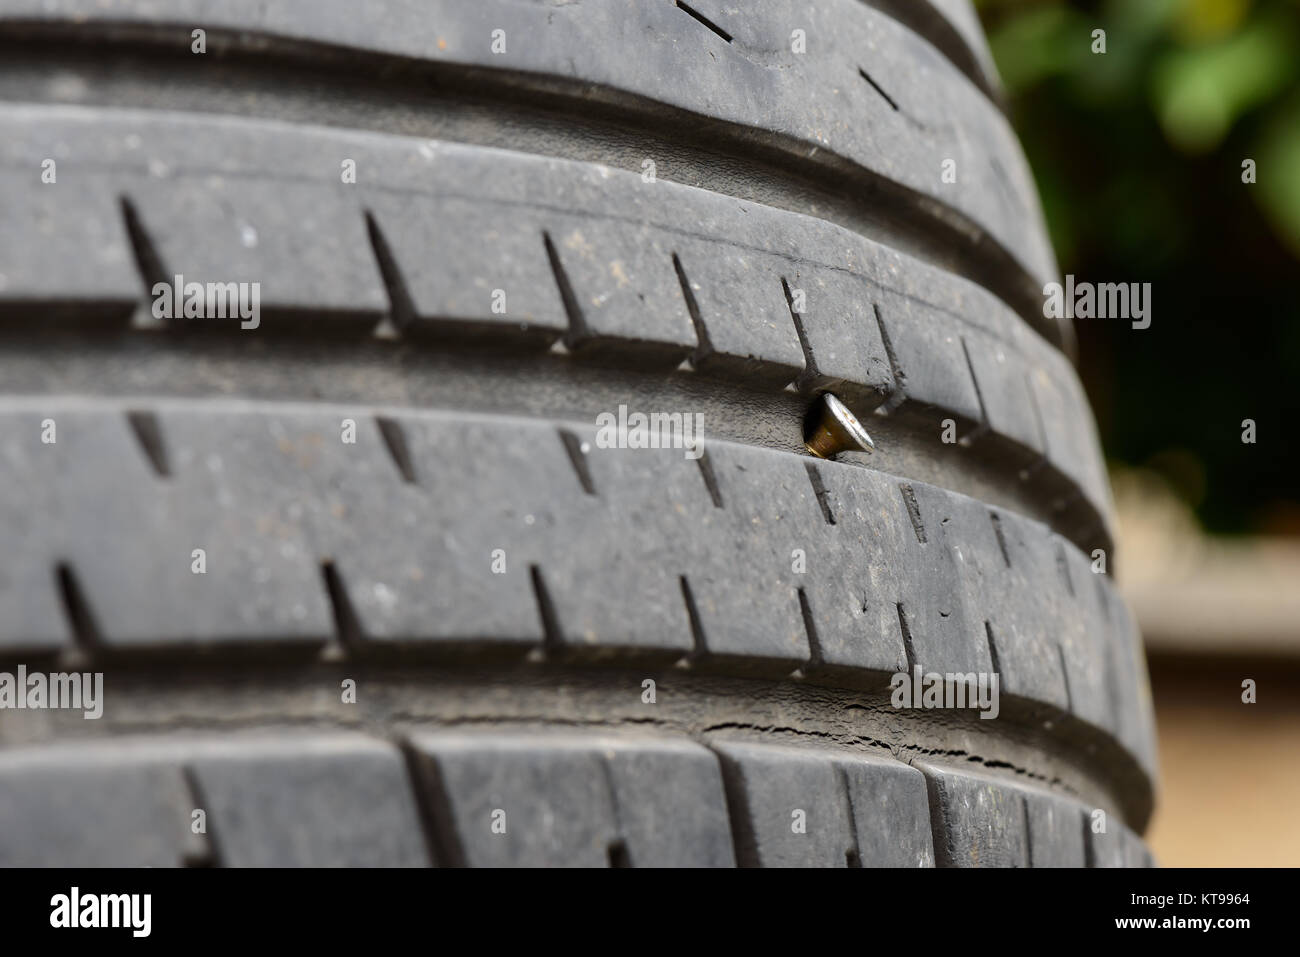 a screw in the tire Stock Photo